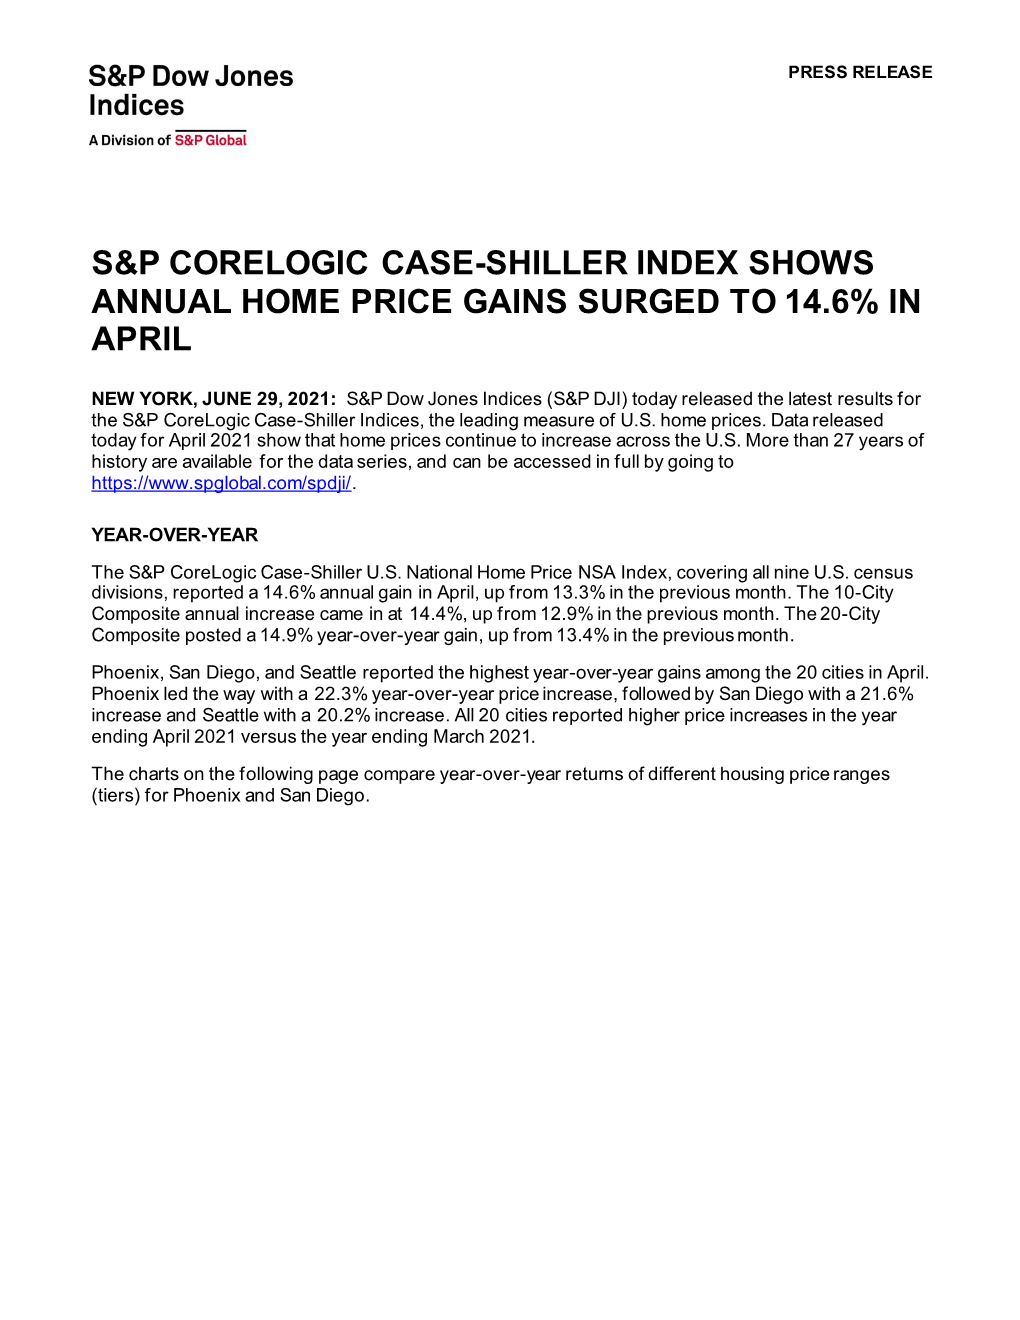 S&P Corelogic Case-Shiller Index Shows Annual Home Price Gains Surged to 14.6% in April